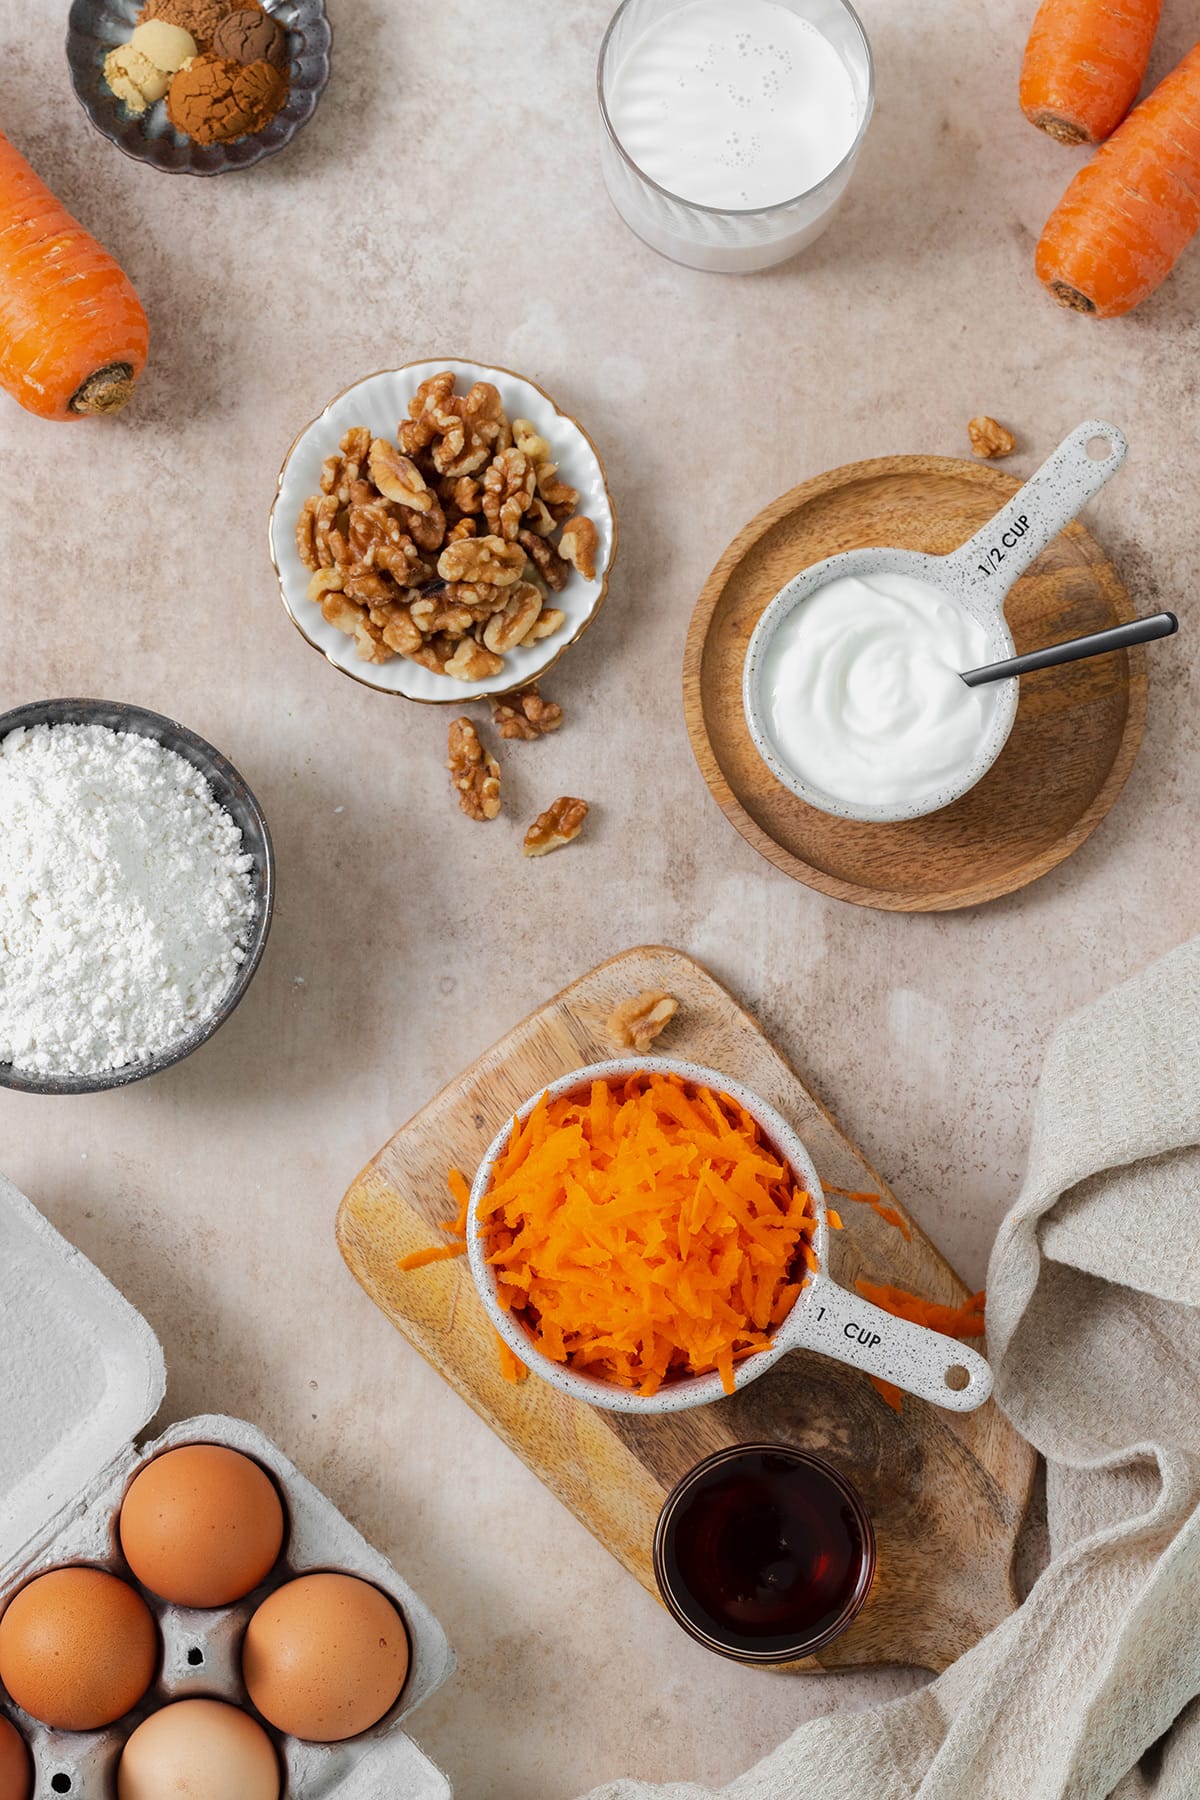 Ingredients for gluten-free carrot cake laid out on a beige background.